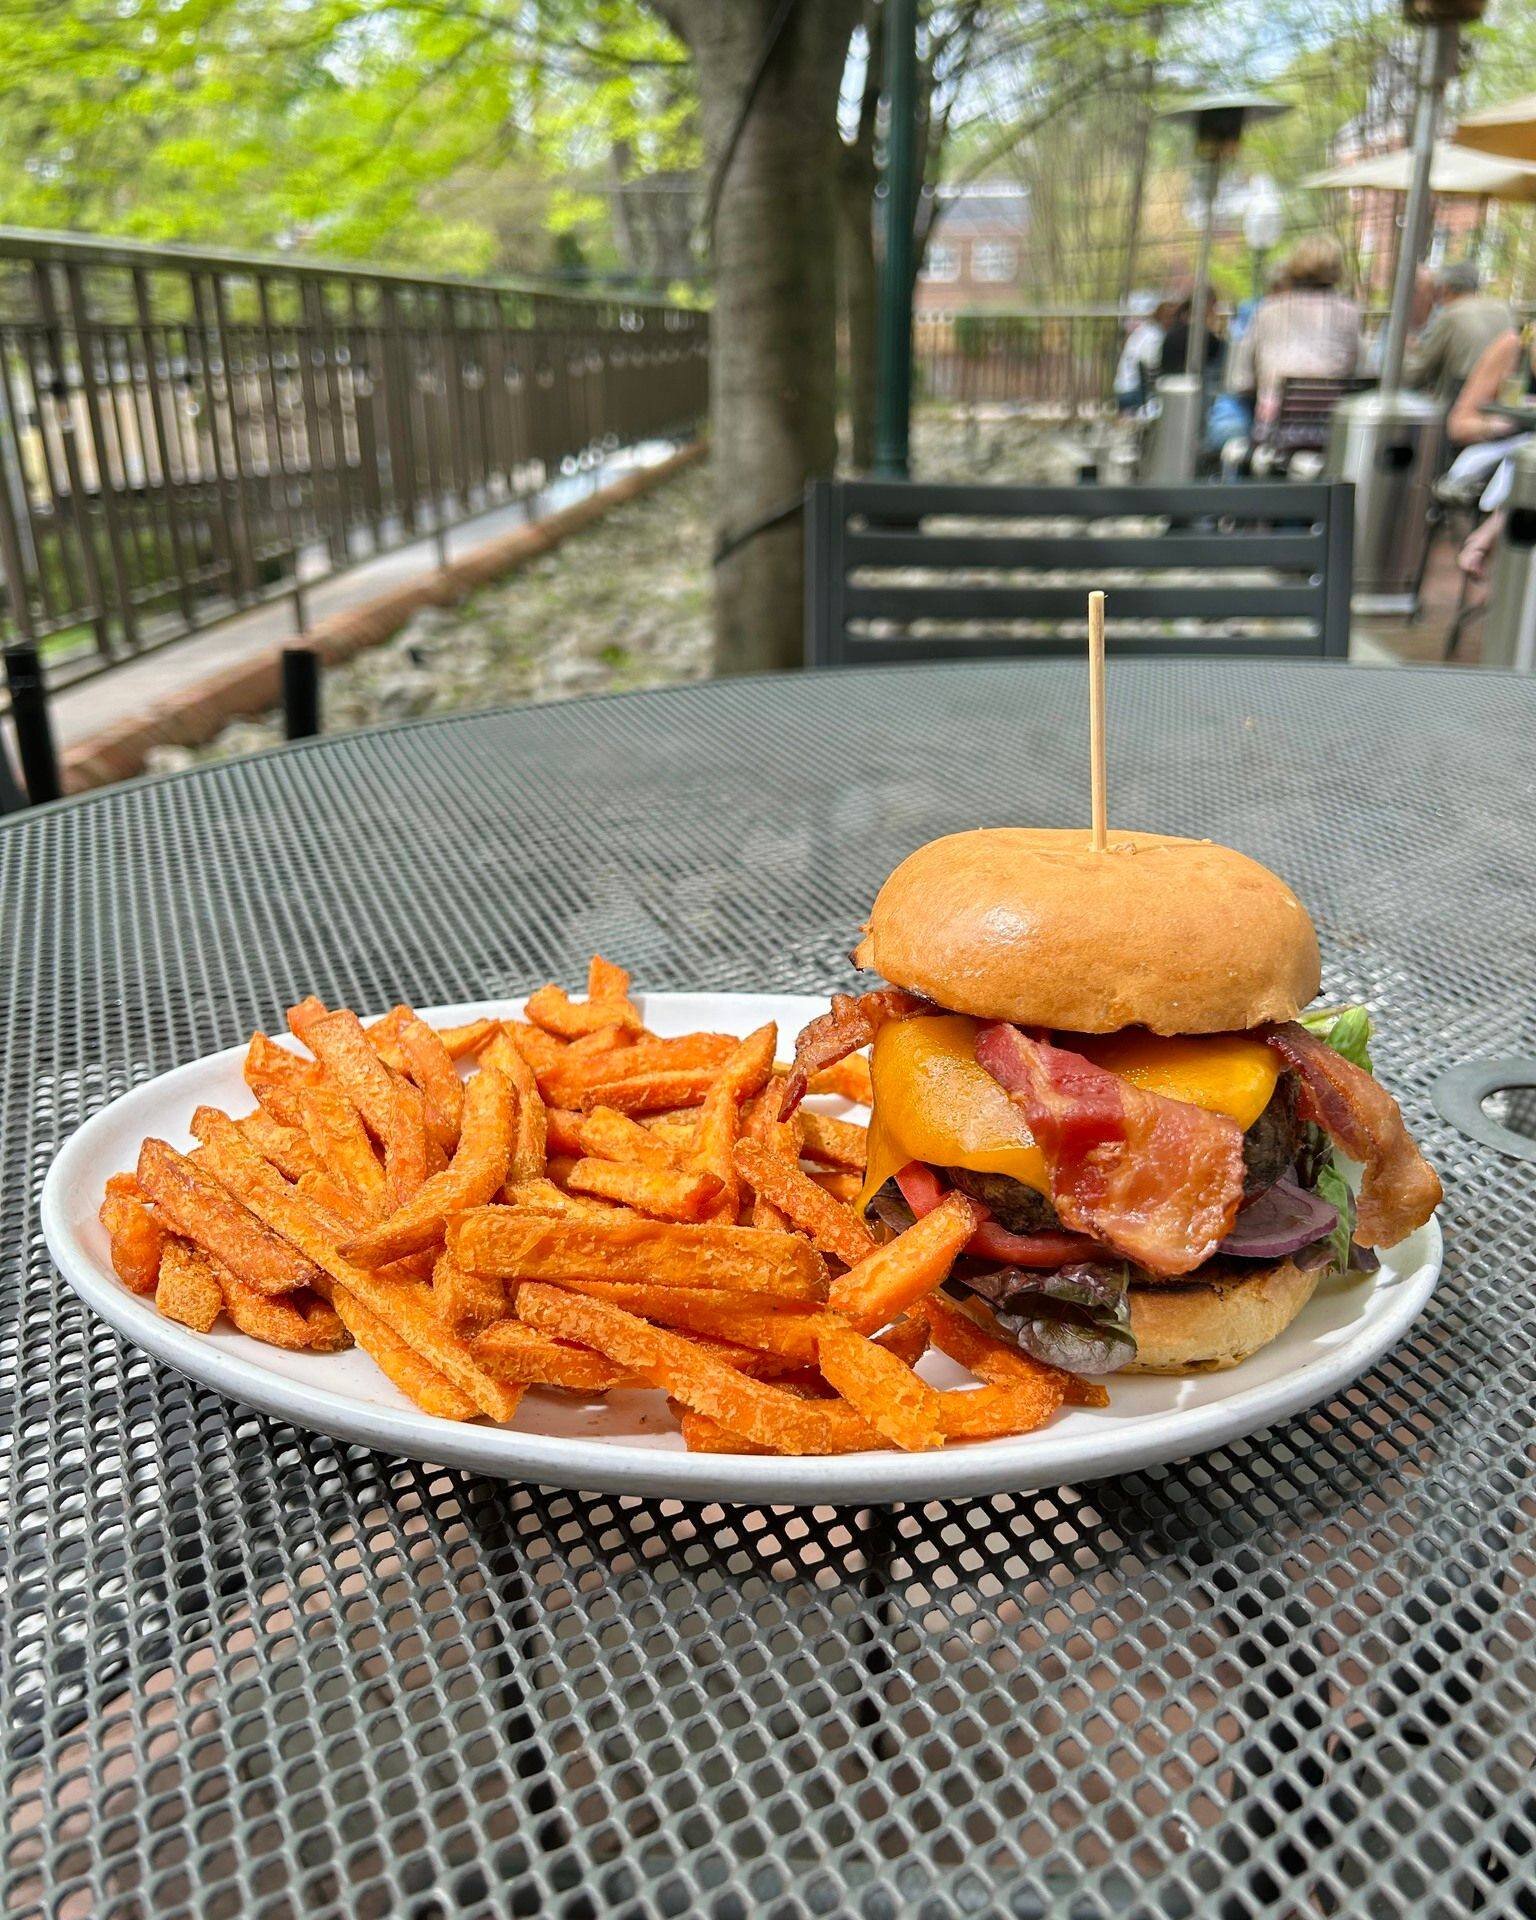 It's $12 Burger Tuesdays! Sign up on our website for $12 burgers and $10 SUPER mugs every Tuesday 🍔🍺🎉🍽️

#washingtondc #dceats #burgers #bacon #fries #burgertime #cheeseburger #beer